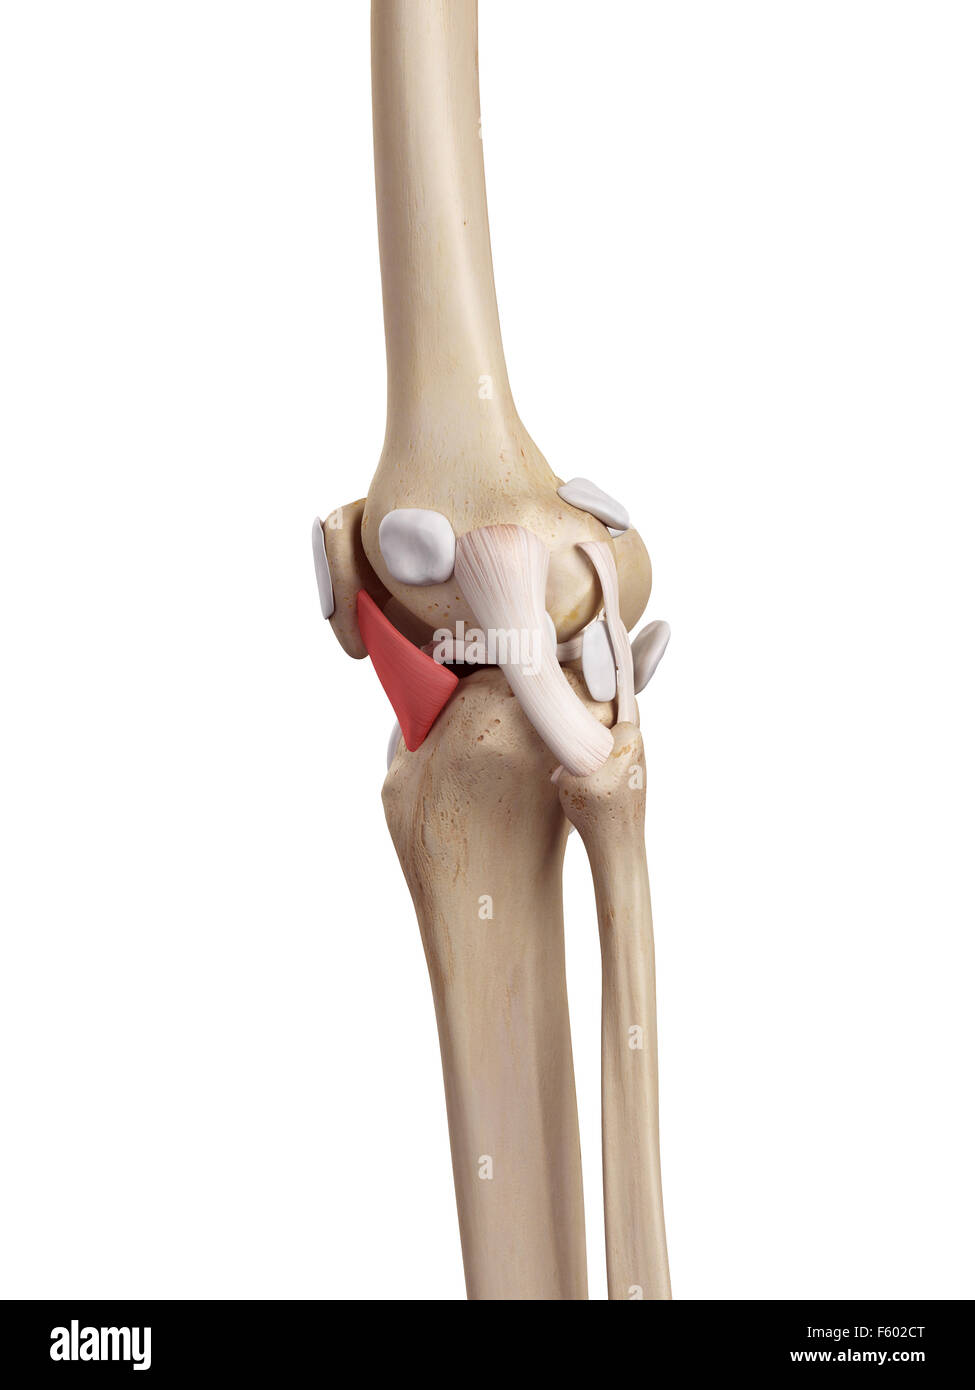 medical accurate illustration of the lateral patellar ligament Stock Photo